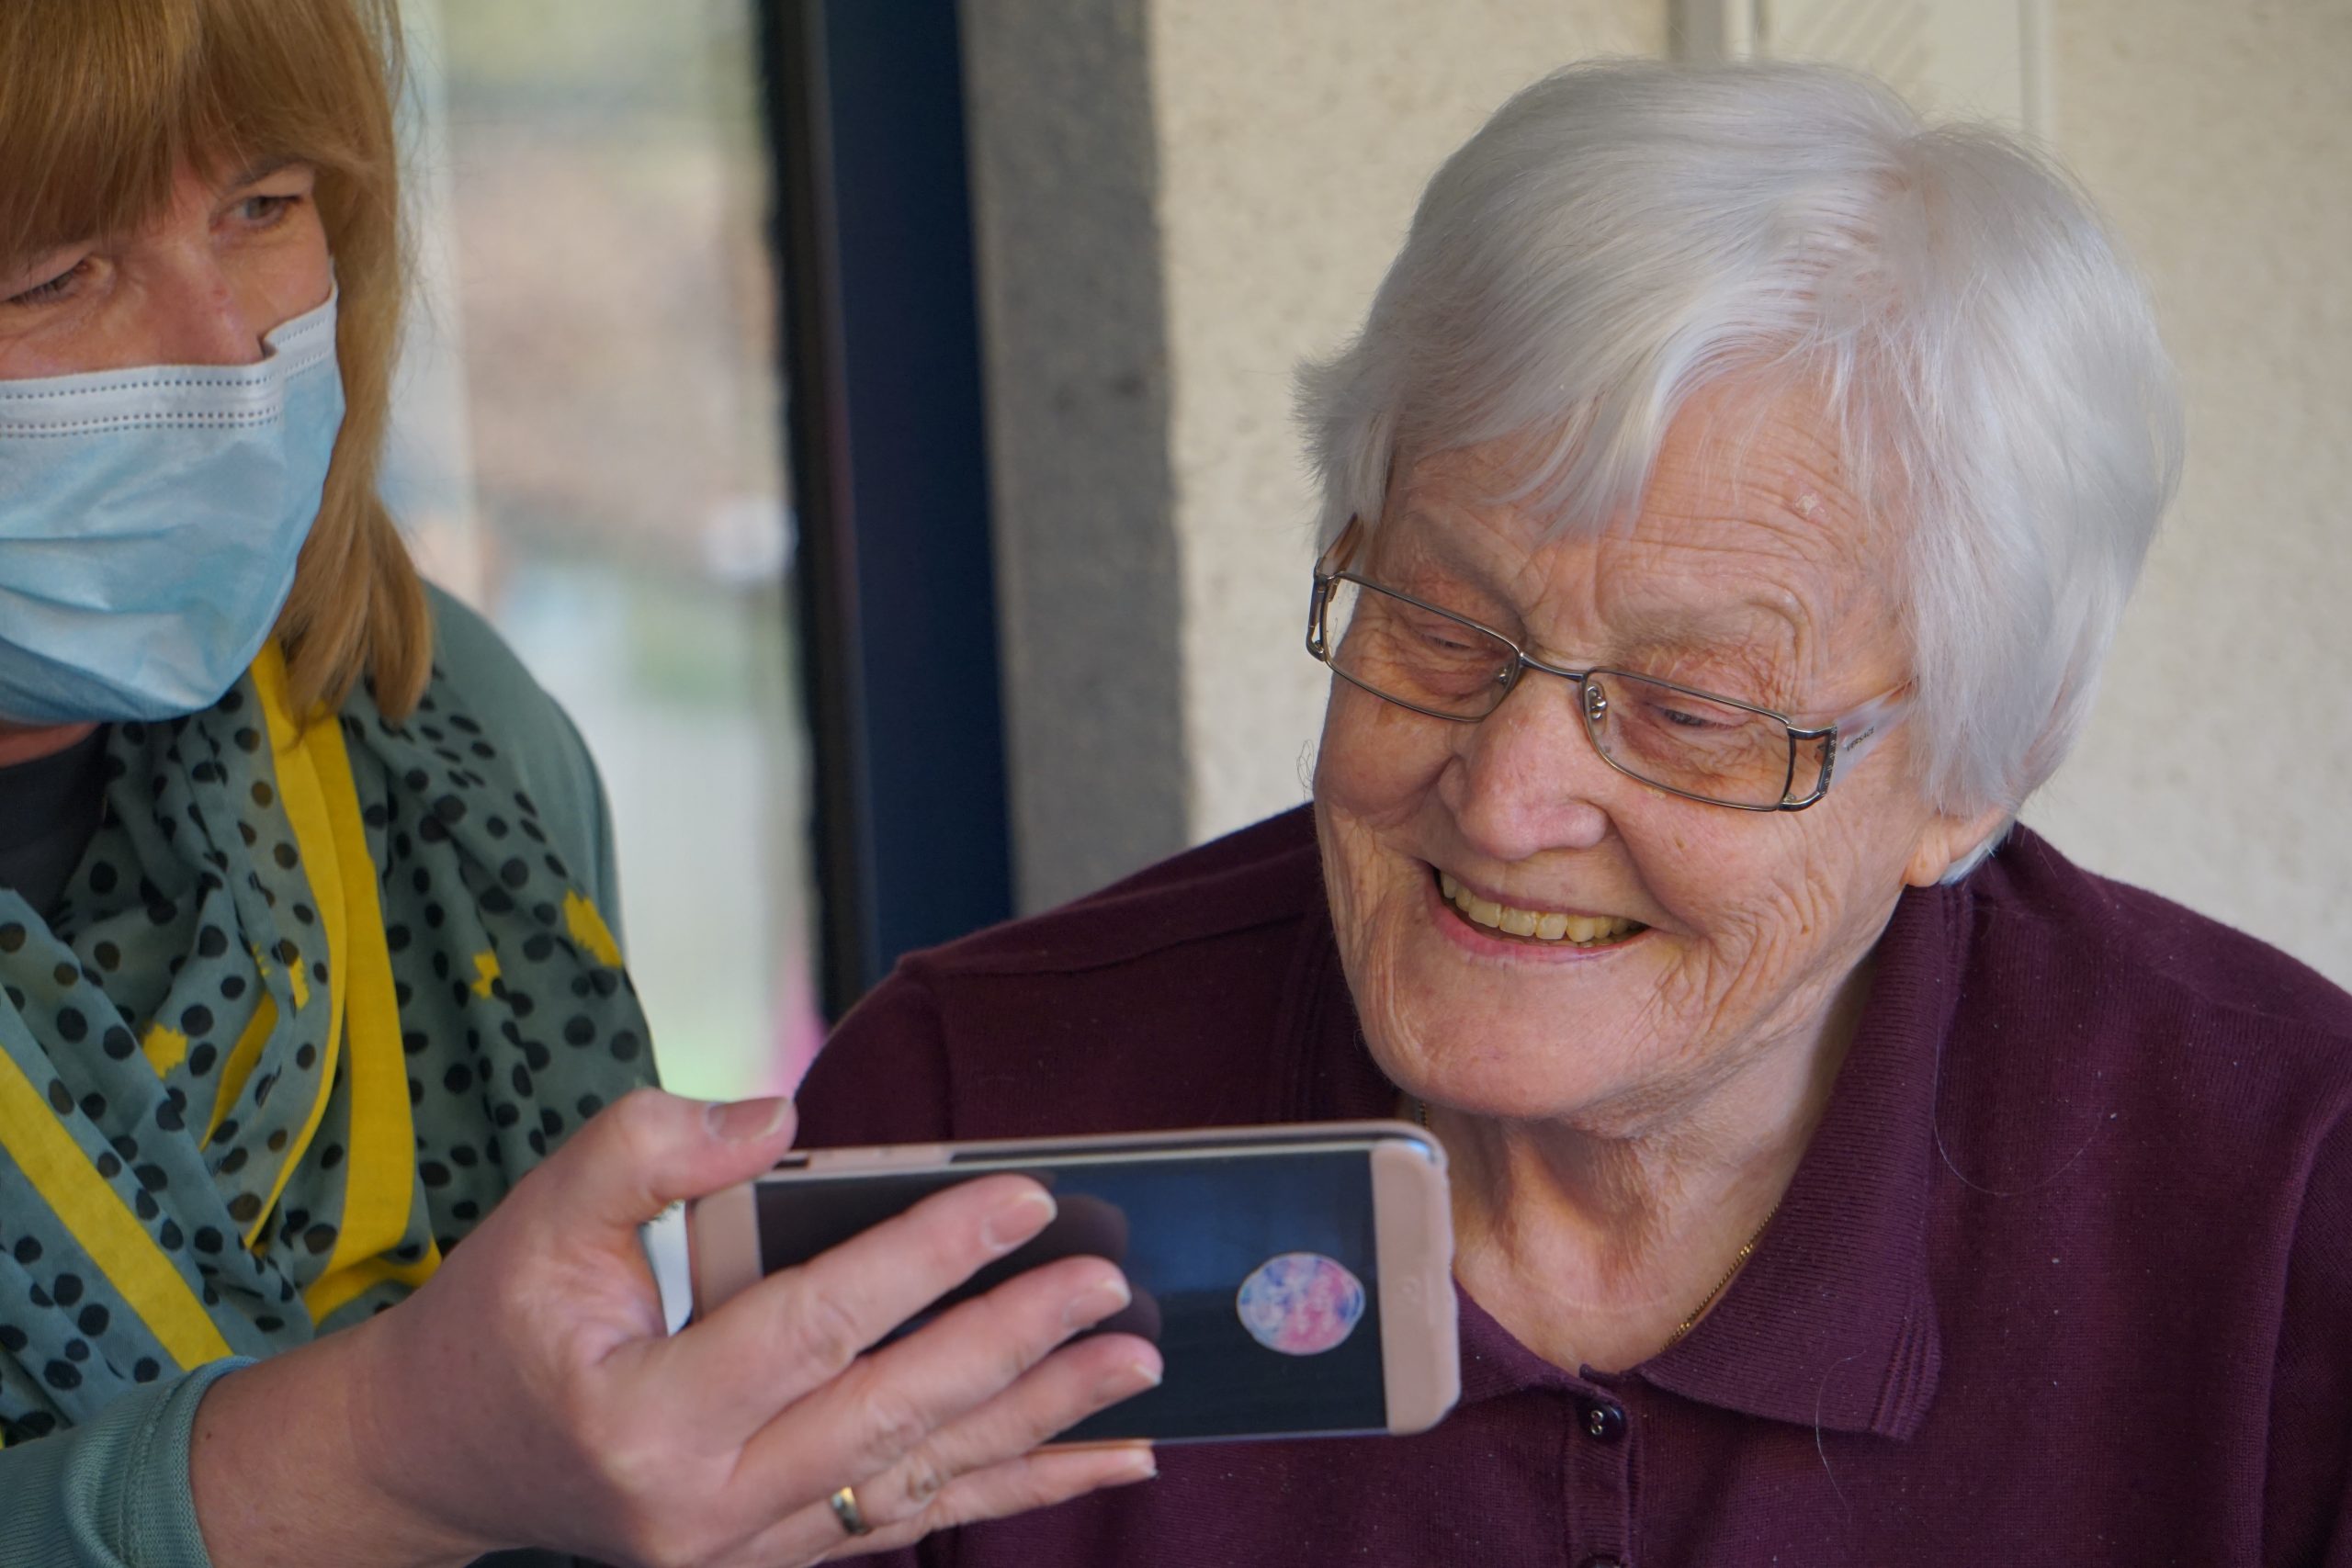 A woman wearing a mask help an elderly woman use a mobile phone